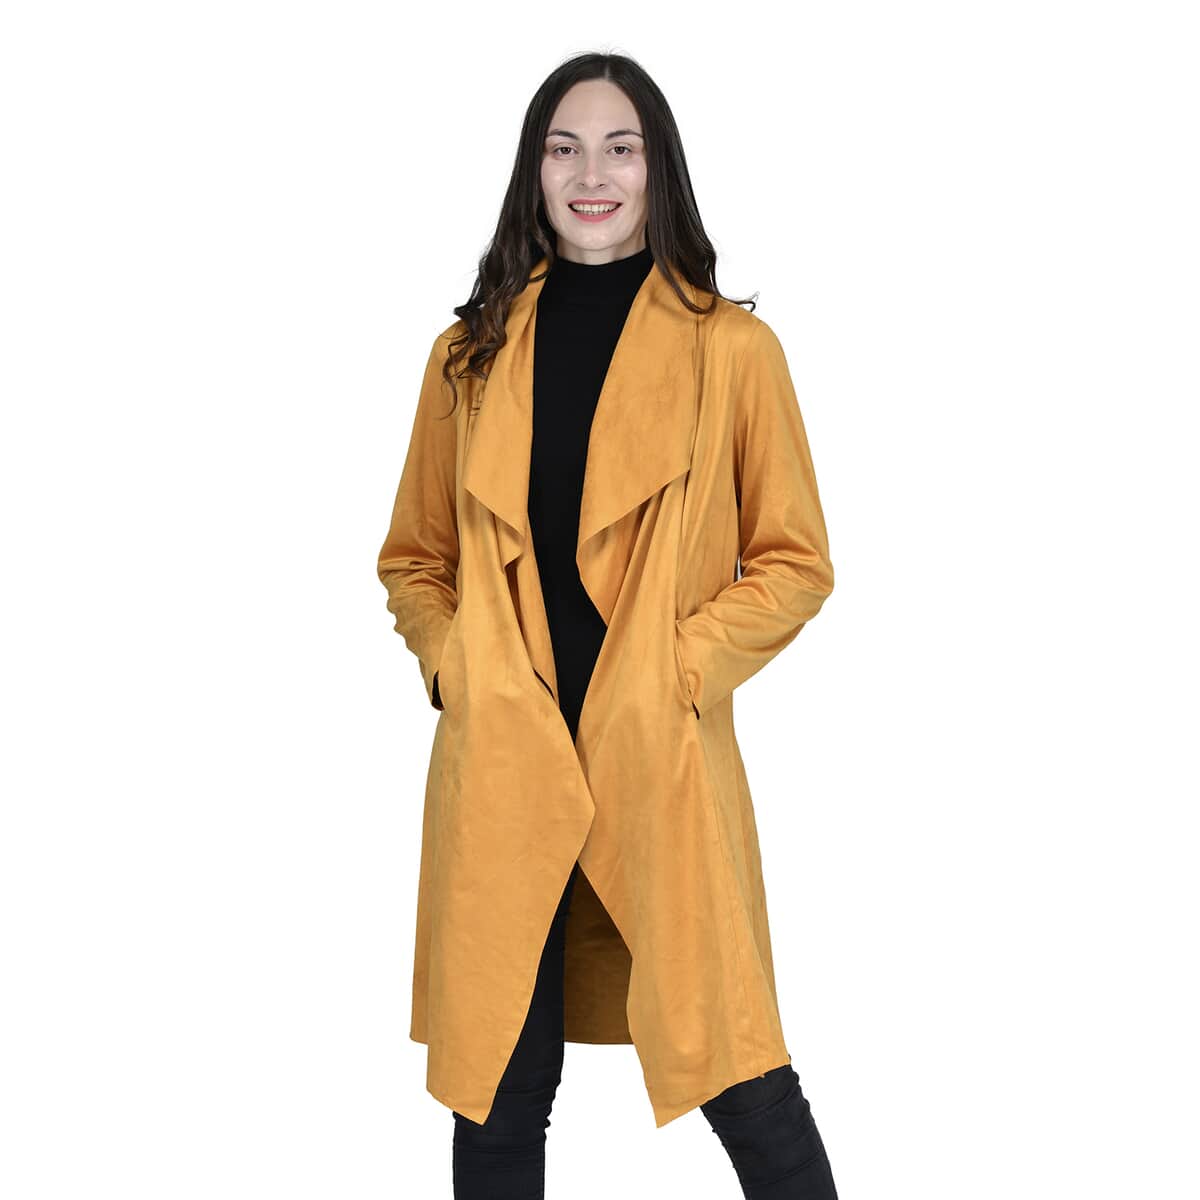 Passage Gold Faux Suede Long Waterfall Open Front Jacket For Ladies -M, Jacket for Women, Long Coat Jacket for Women, Womens Coats image number 0